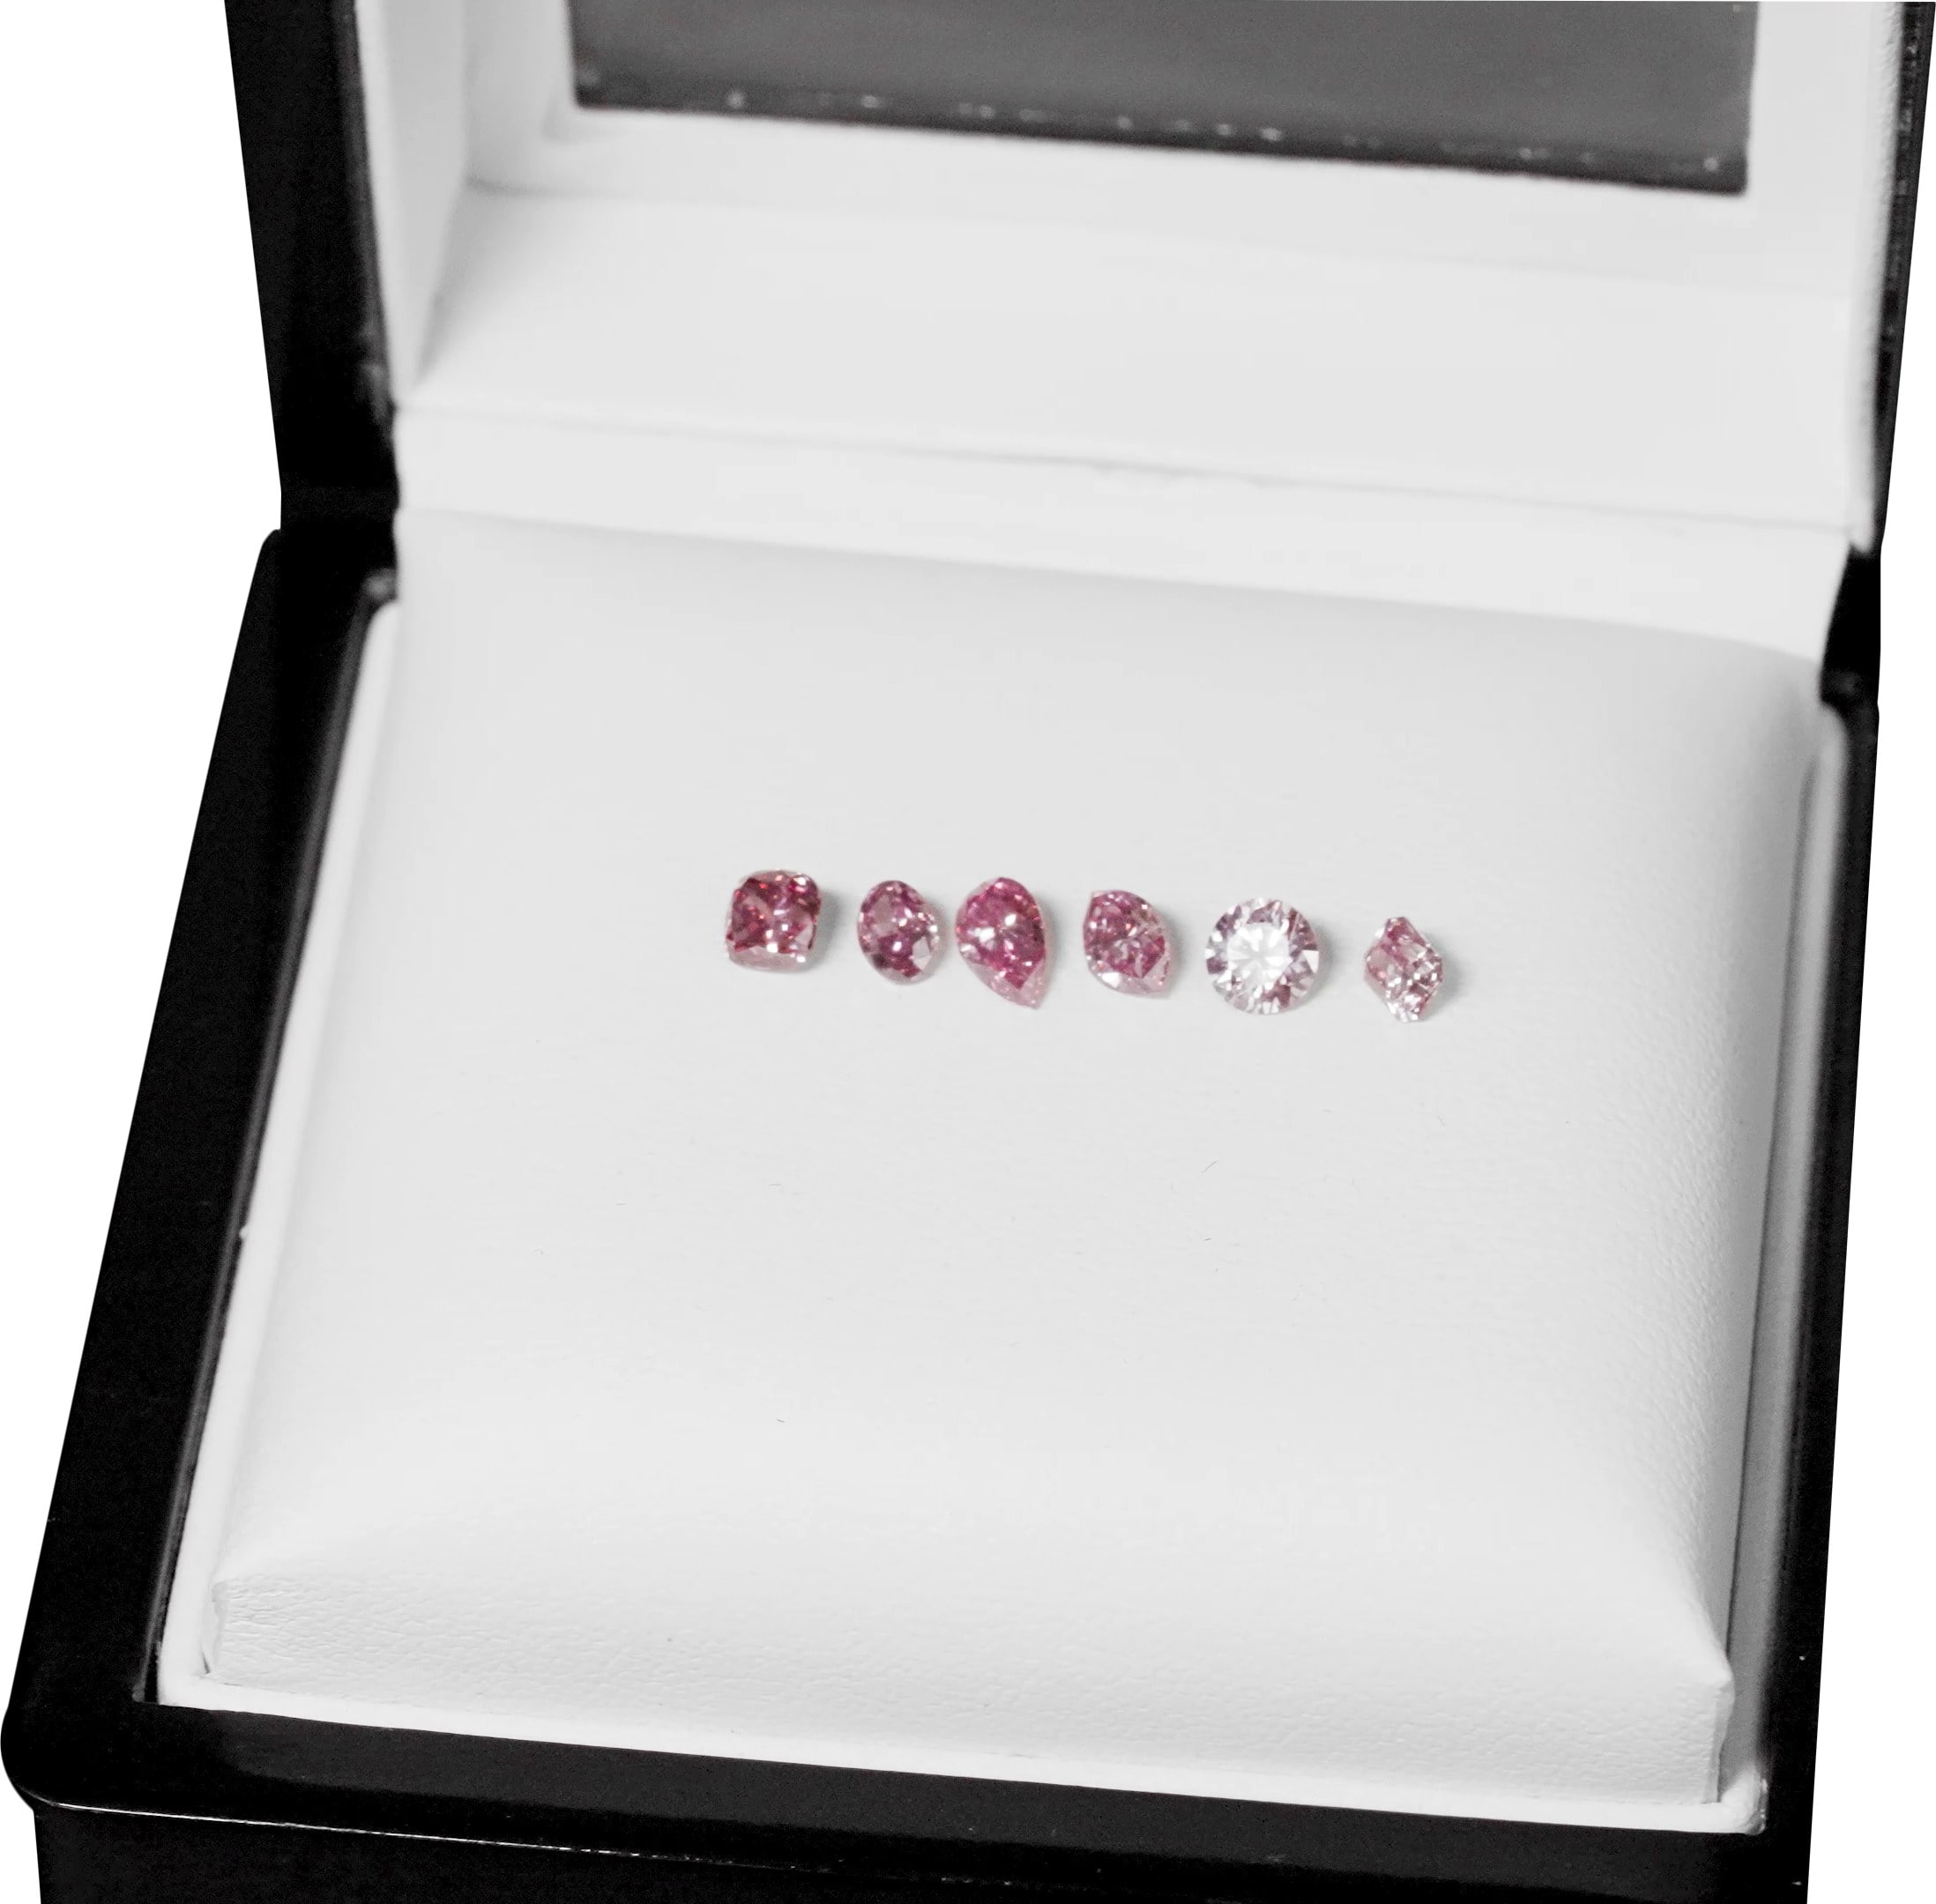 Different shapes of small pink diamonds